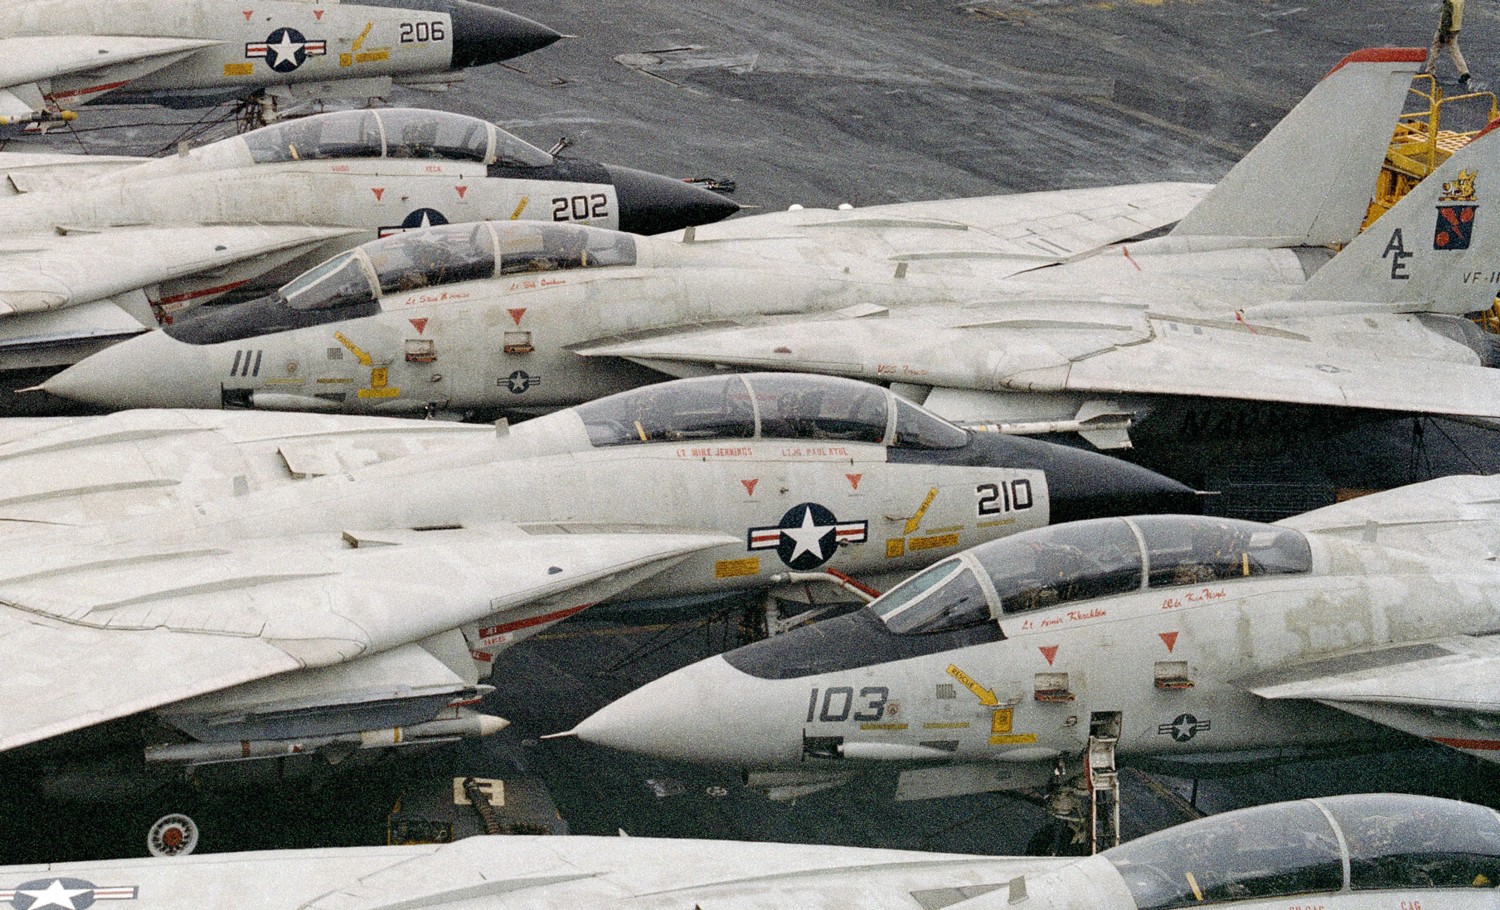 vf-11 red rippers fighter squadron us navy fitron f-14a tomcat carrier air wing cvw-6 uss forrestal cv-59 02